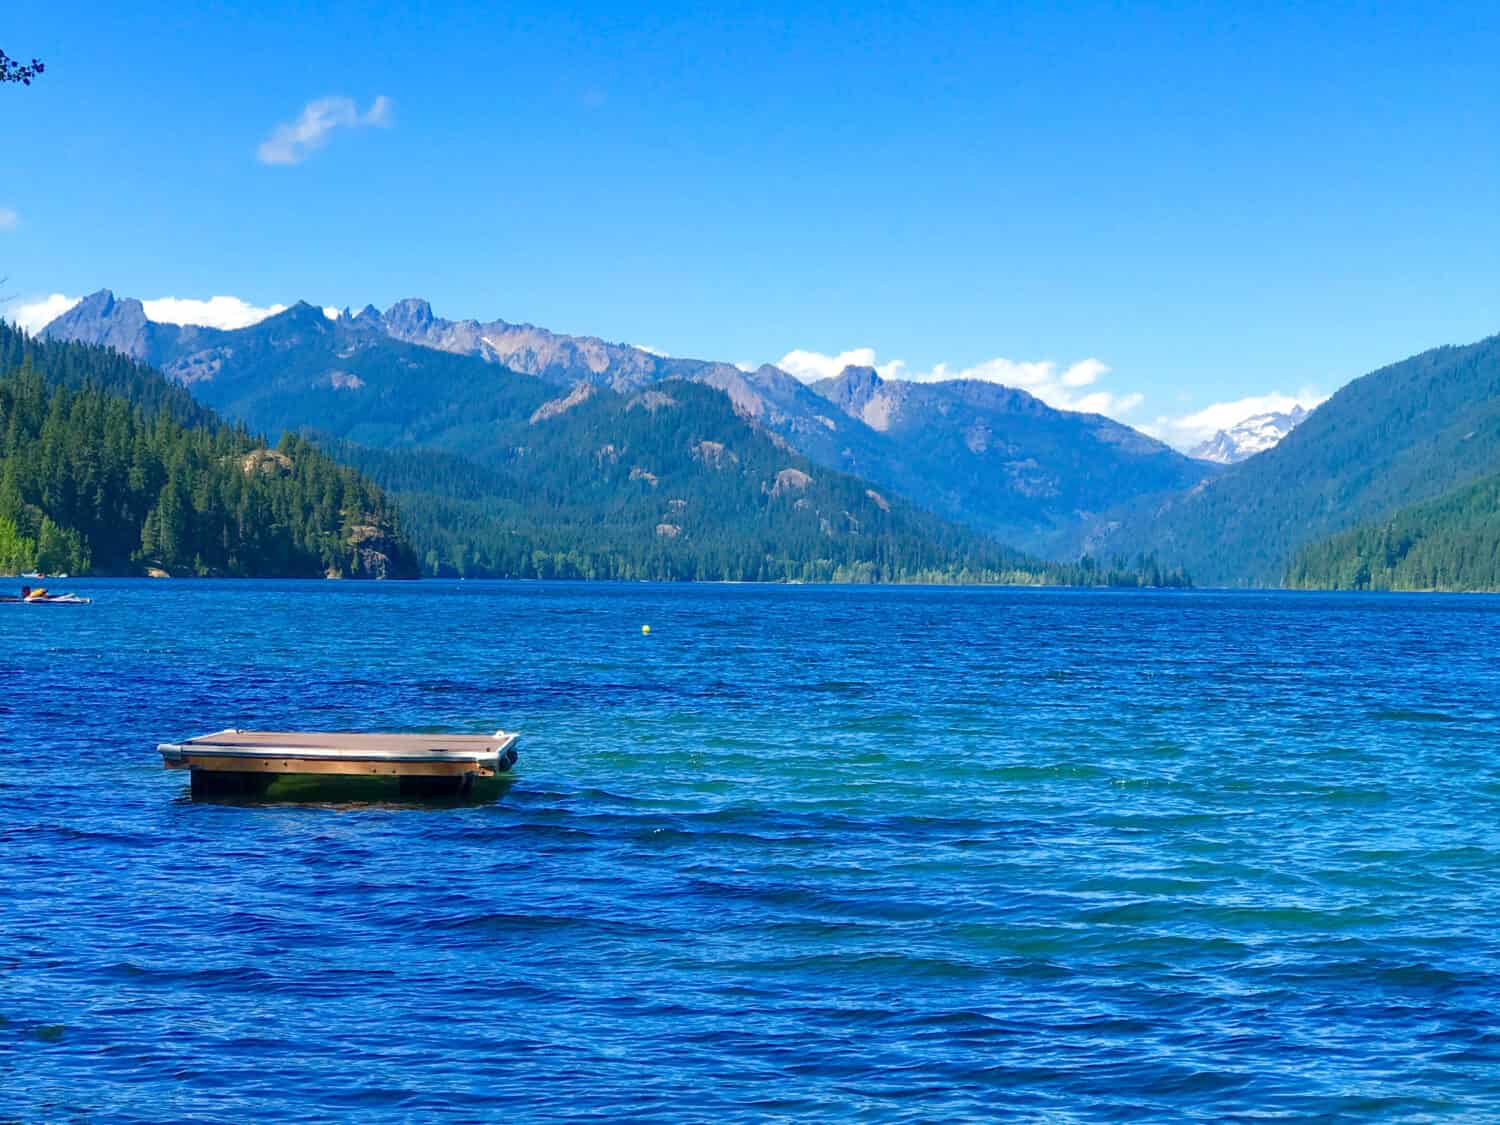 A serene view of Little Kachess Lake, nestled among lush green trees and surrounded by mountains